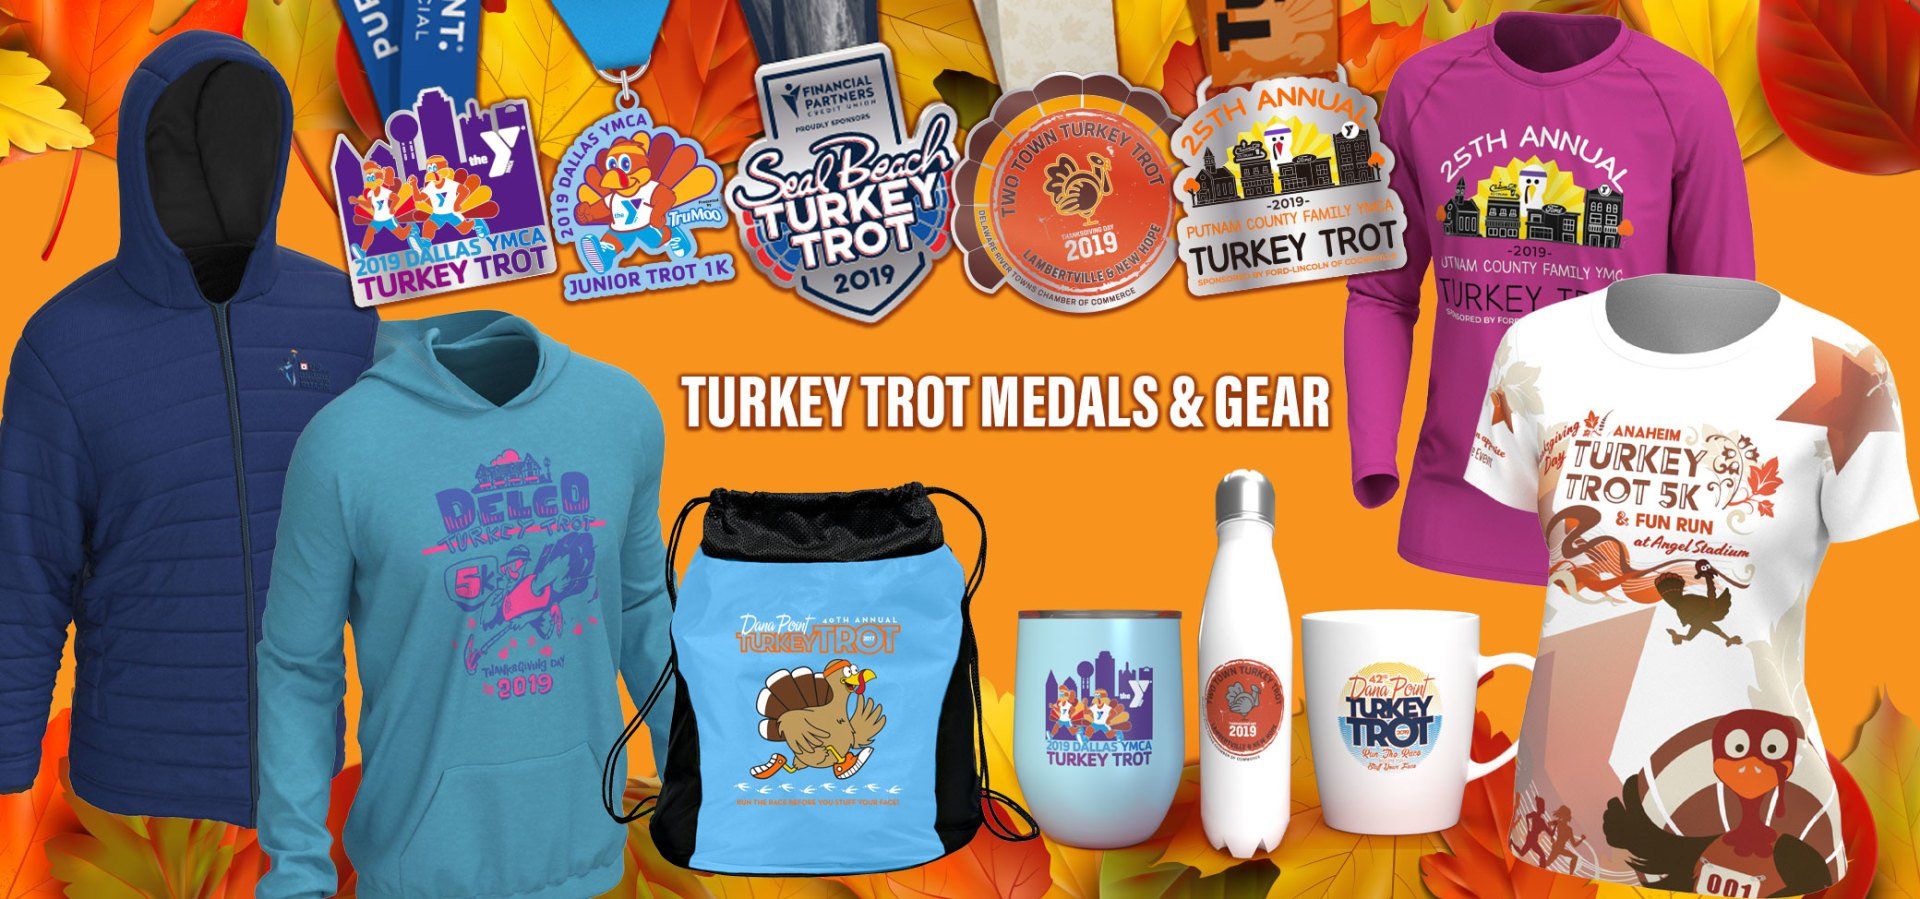 A variety of turkey trot medals and gear are displayed on a table.